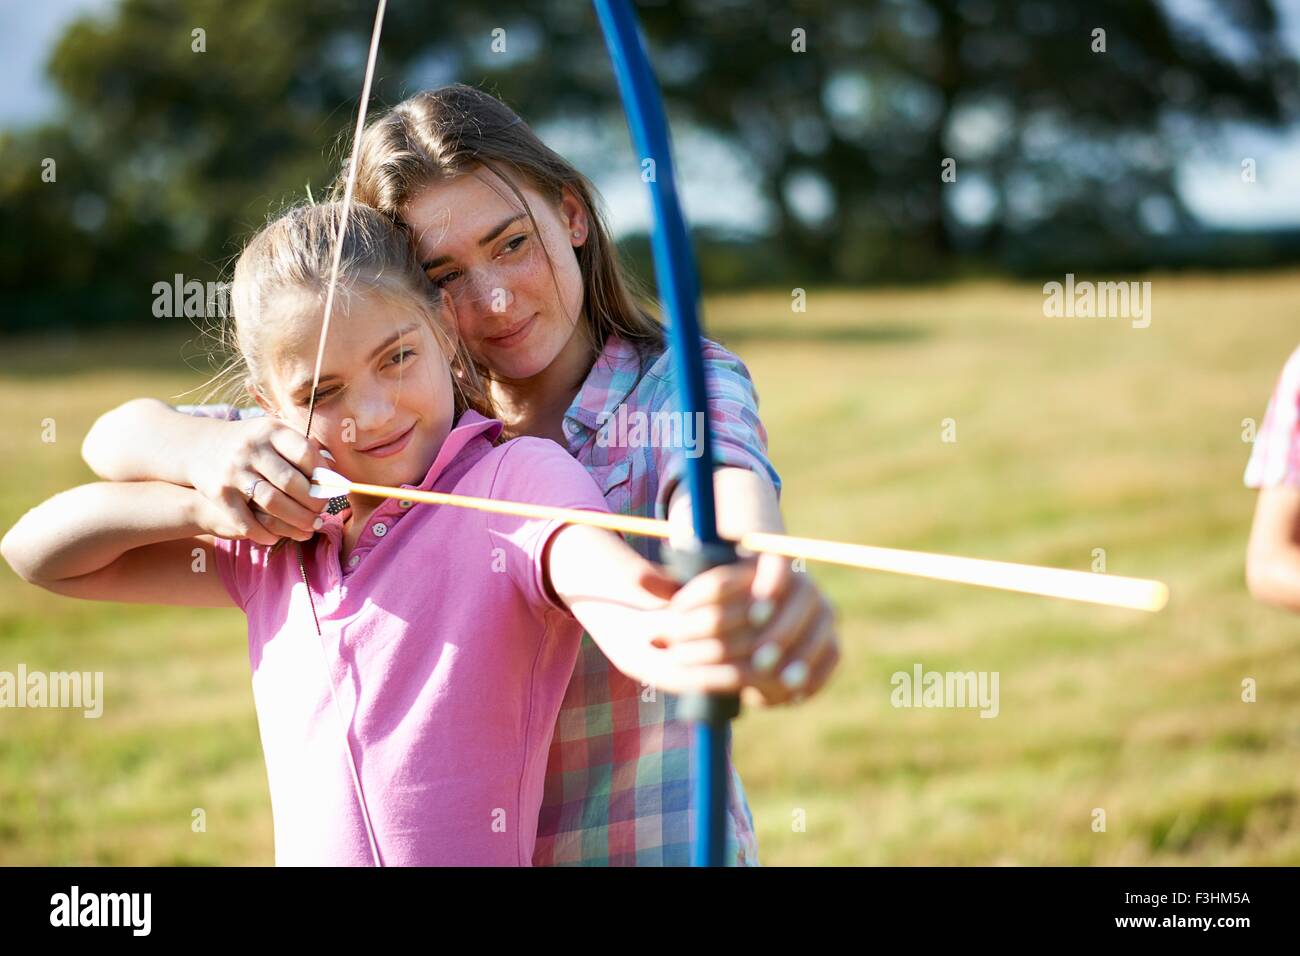 Girl learning archery from teenage sister Stock Photo